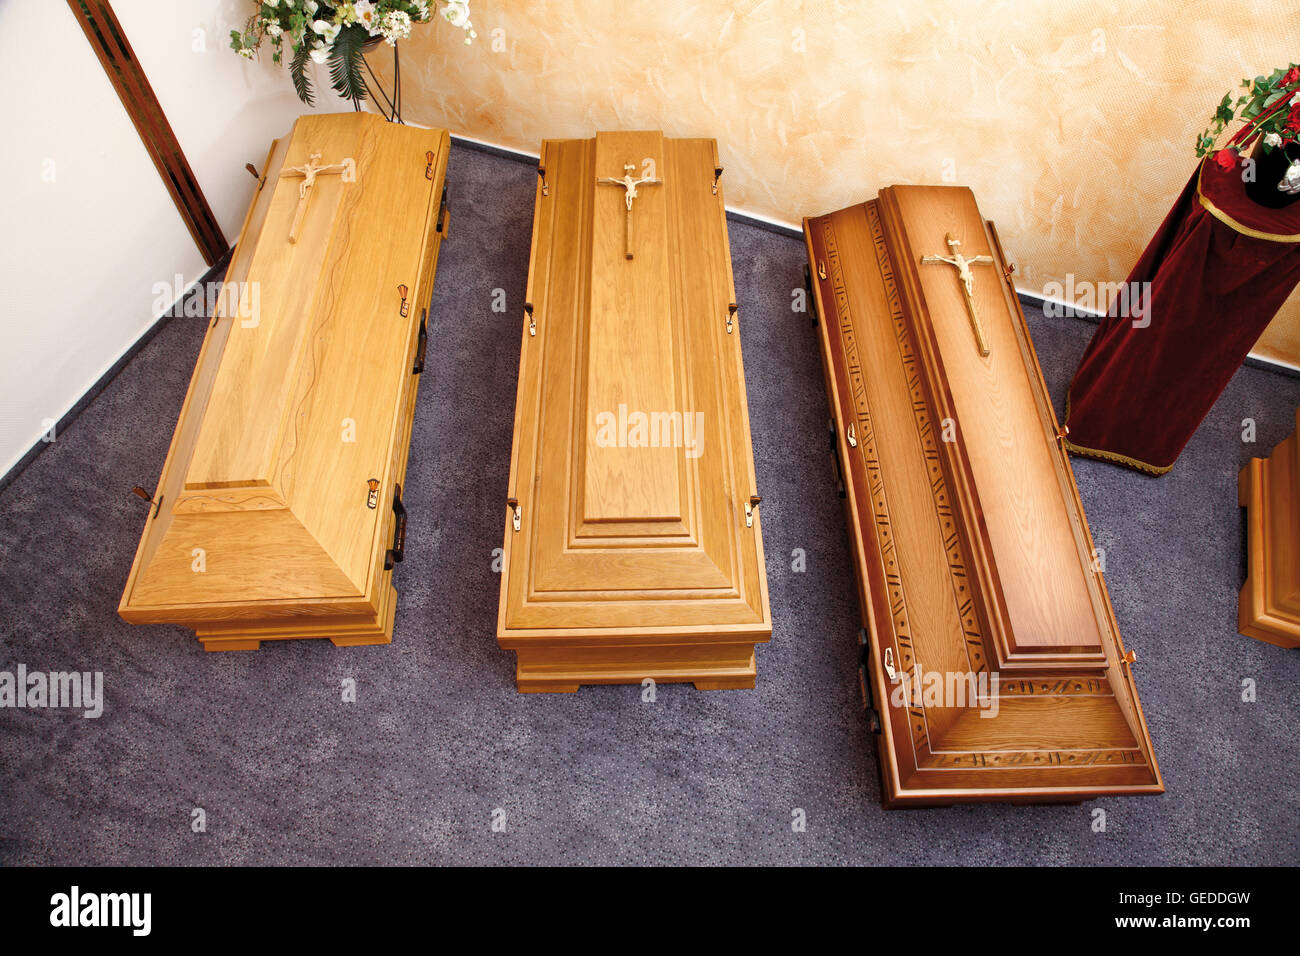 Wooden coffins on display in a showroom, show room Stock Photo